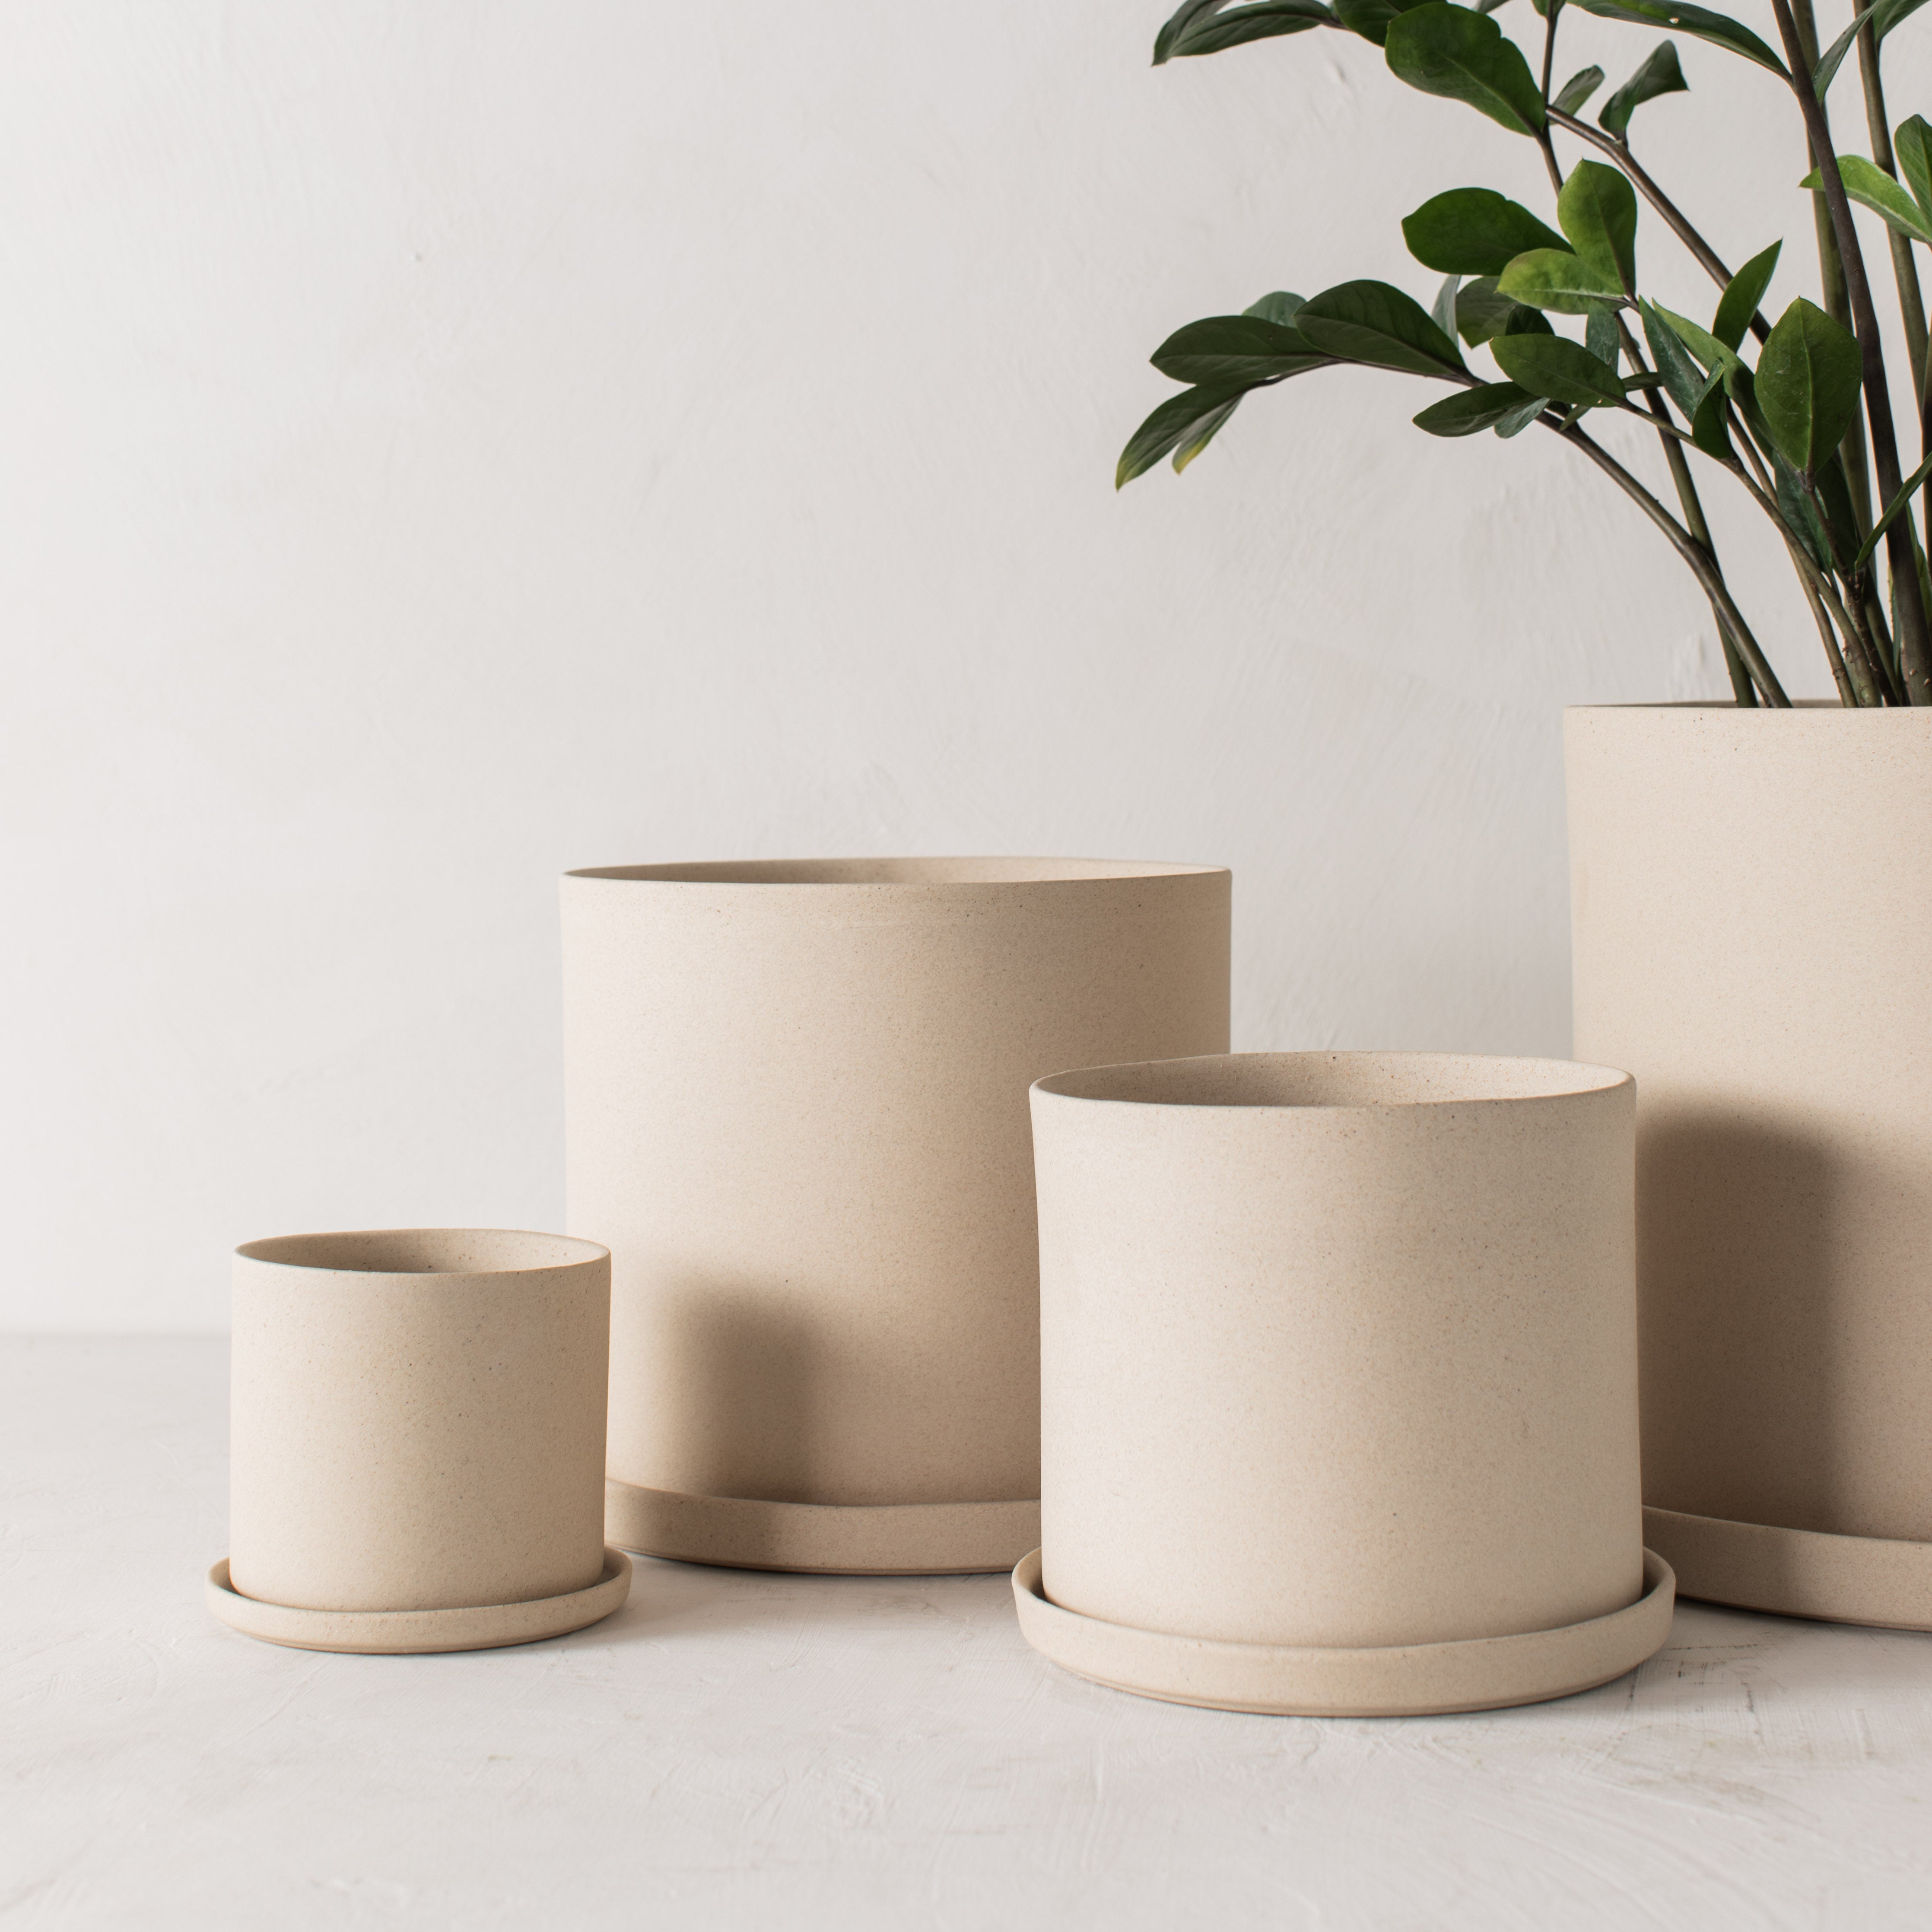 Four stoneware ceramic planters with bottom drainage dishes, 4,6, 8, and 10 inches. Staged on a white plaster textured tabletop against a plaster textured white wall. Large tall zz plant inside the 10 inch. Designed and sold by Convivial Production, Kansas City Ceramics.  Edit alt text